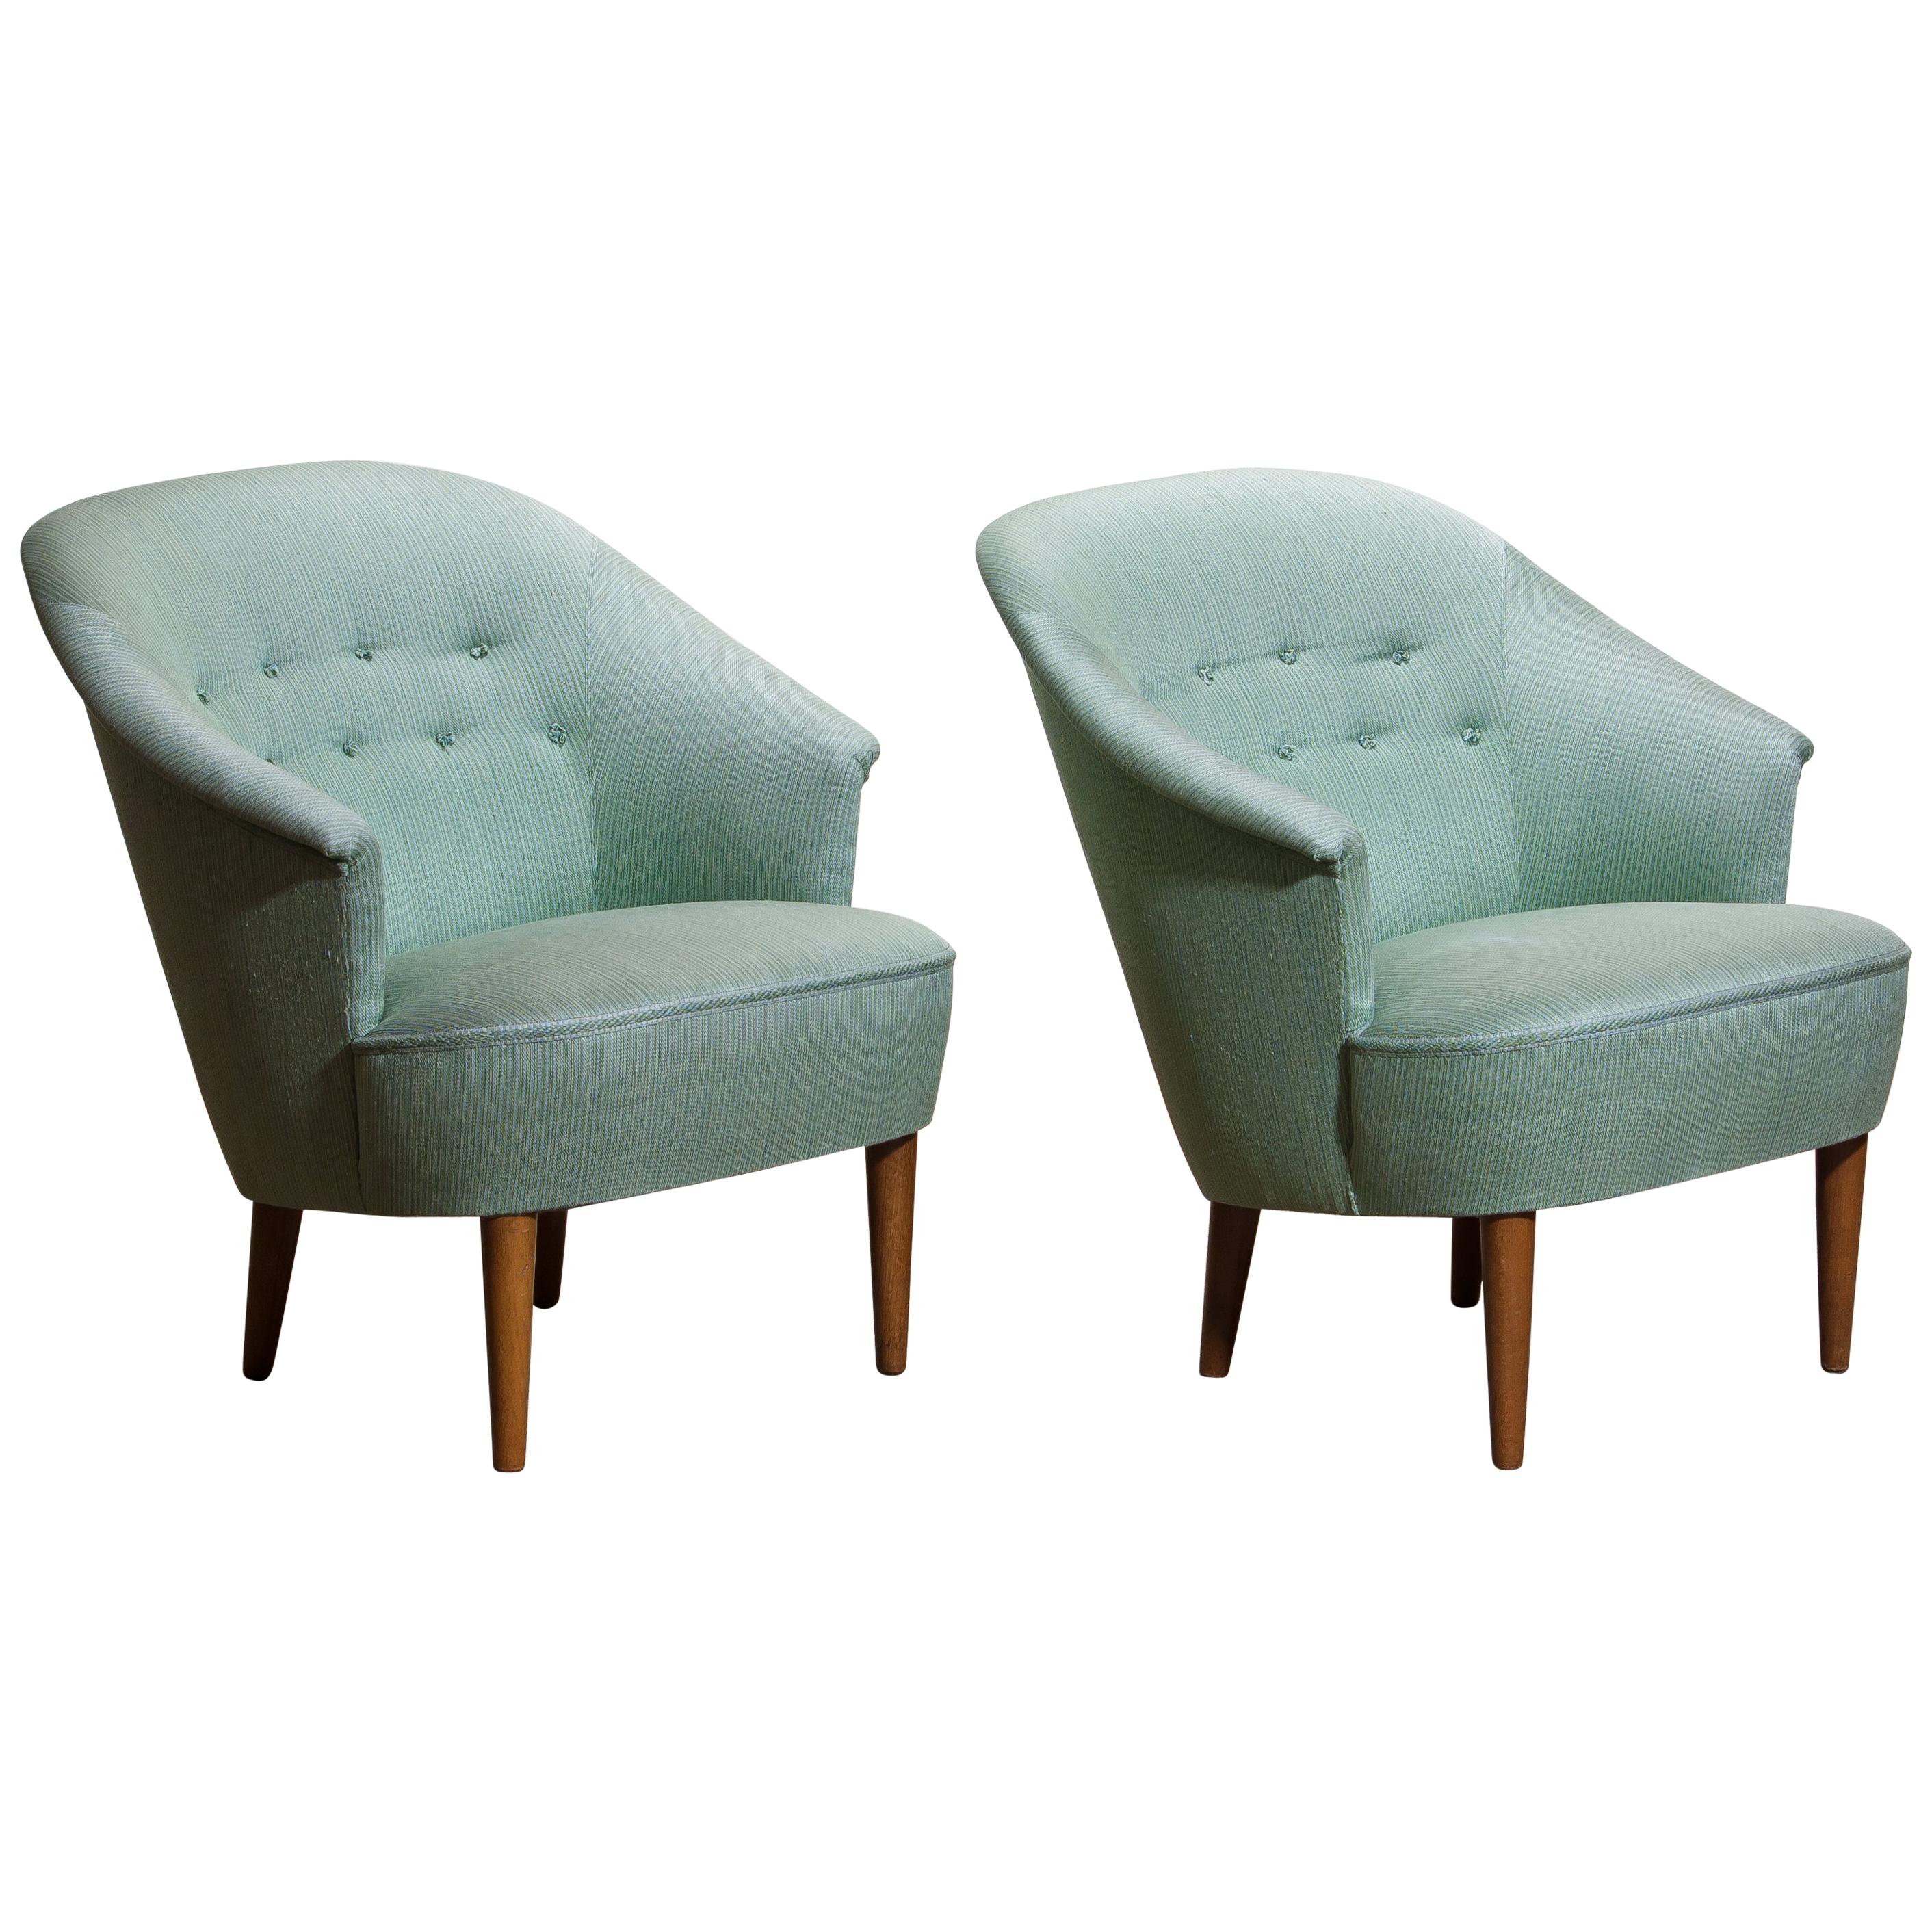 1950s Pair of "Lillasyster" Lounge or Easy Chairs by Carl Malmsten, Sweden